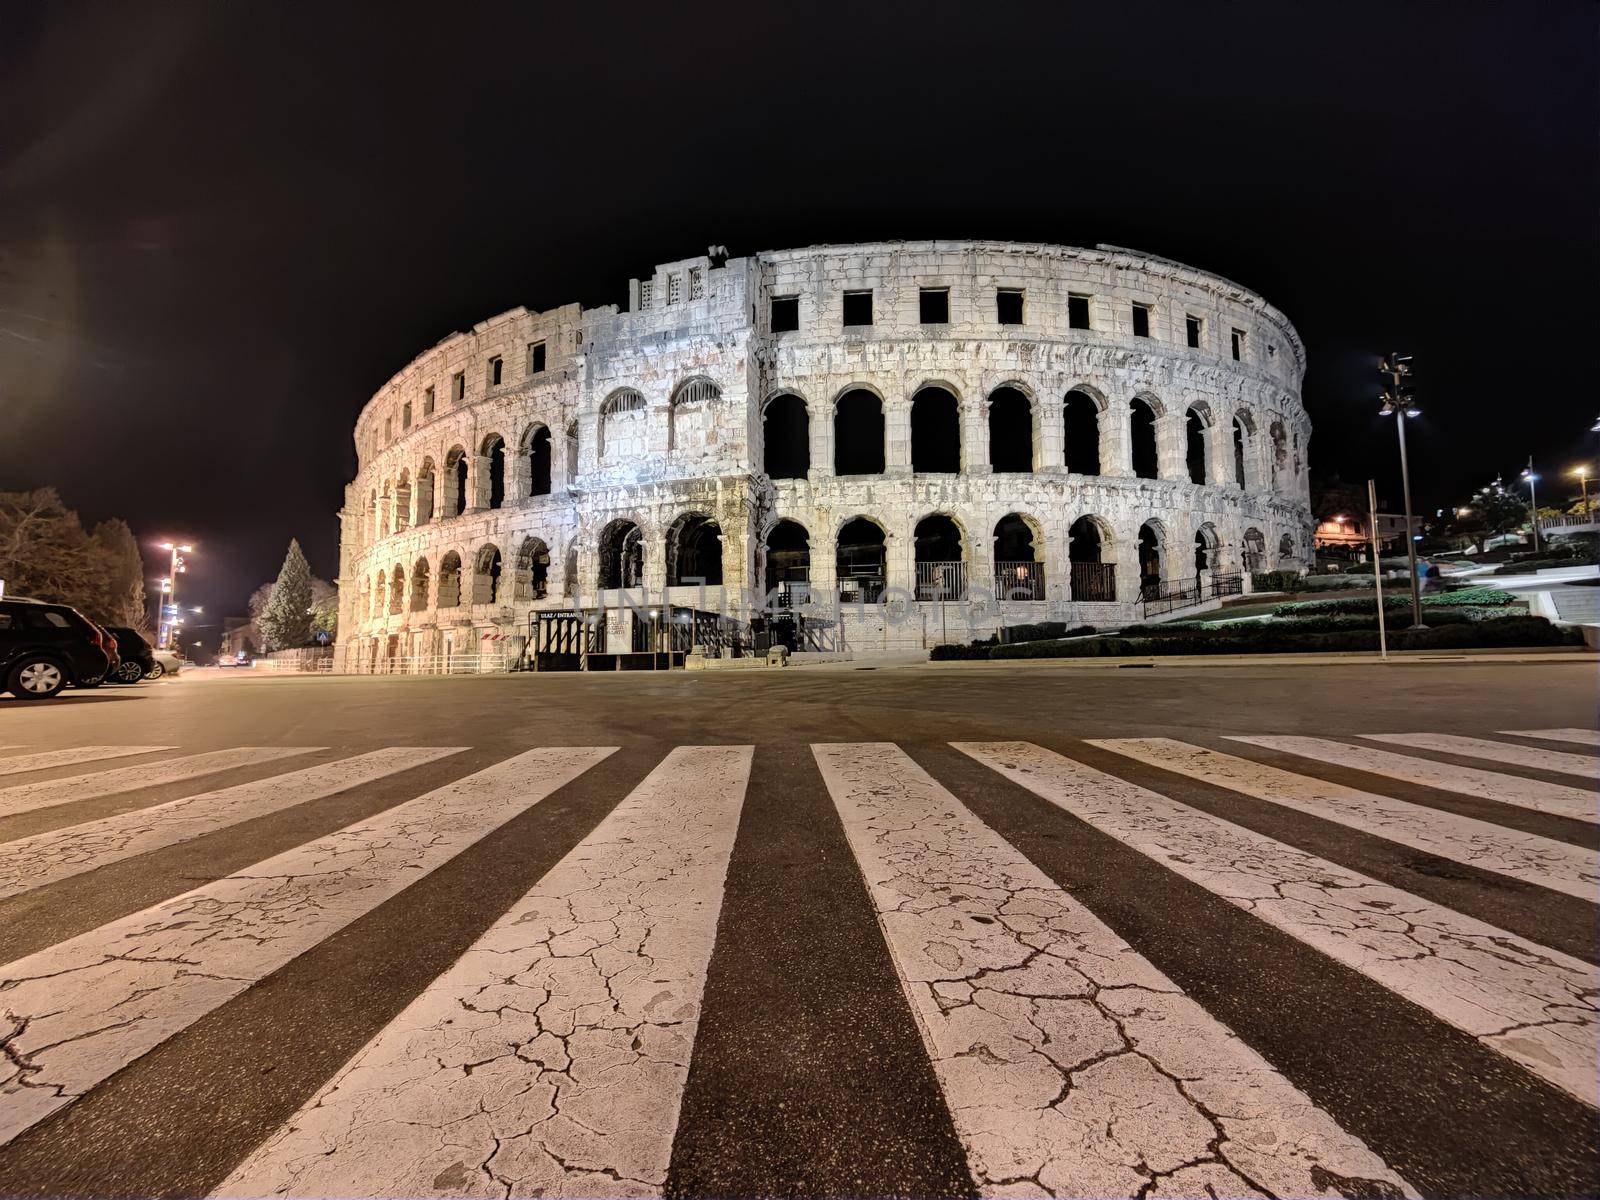 Croatia. Pula. Ruins of the best preserved Roman amphitheatre built in the first century AD during the reign of the Emperor Vespasian shot at night.